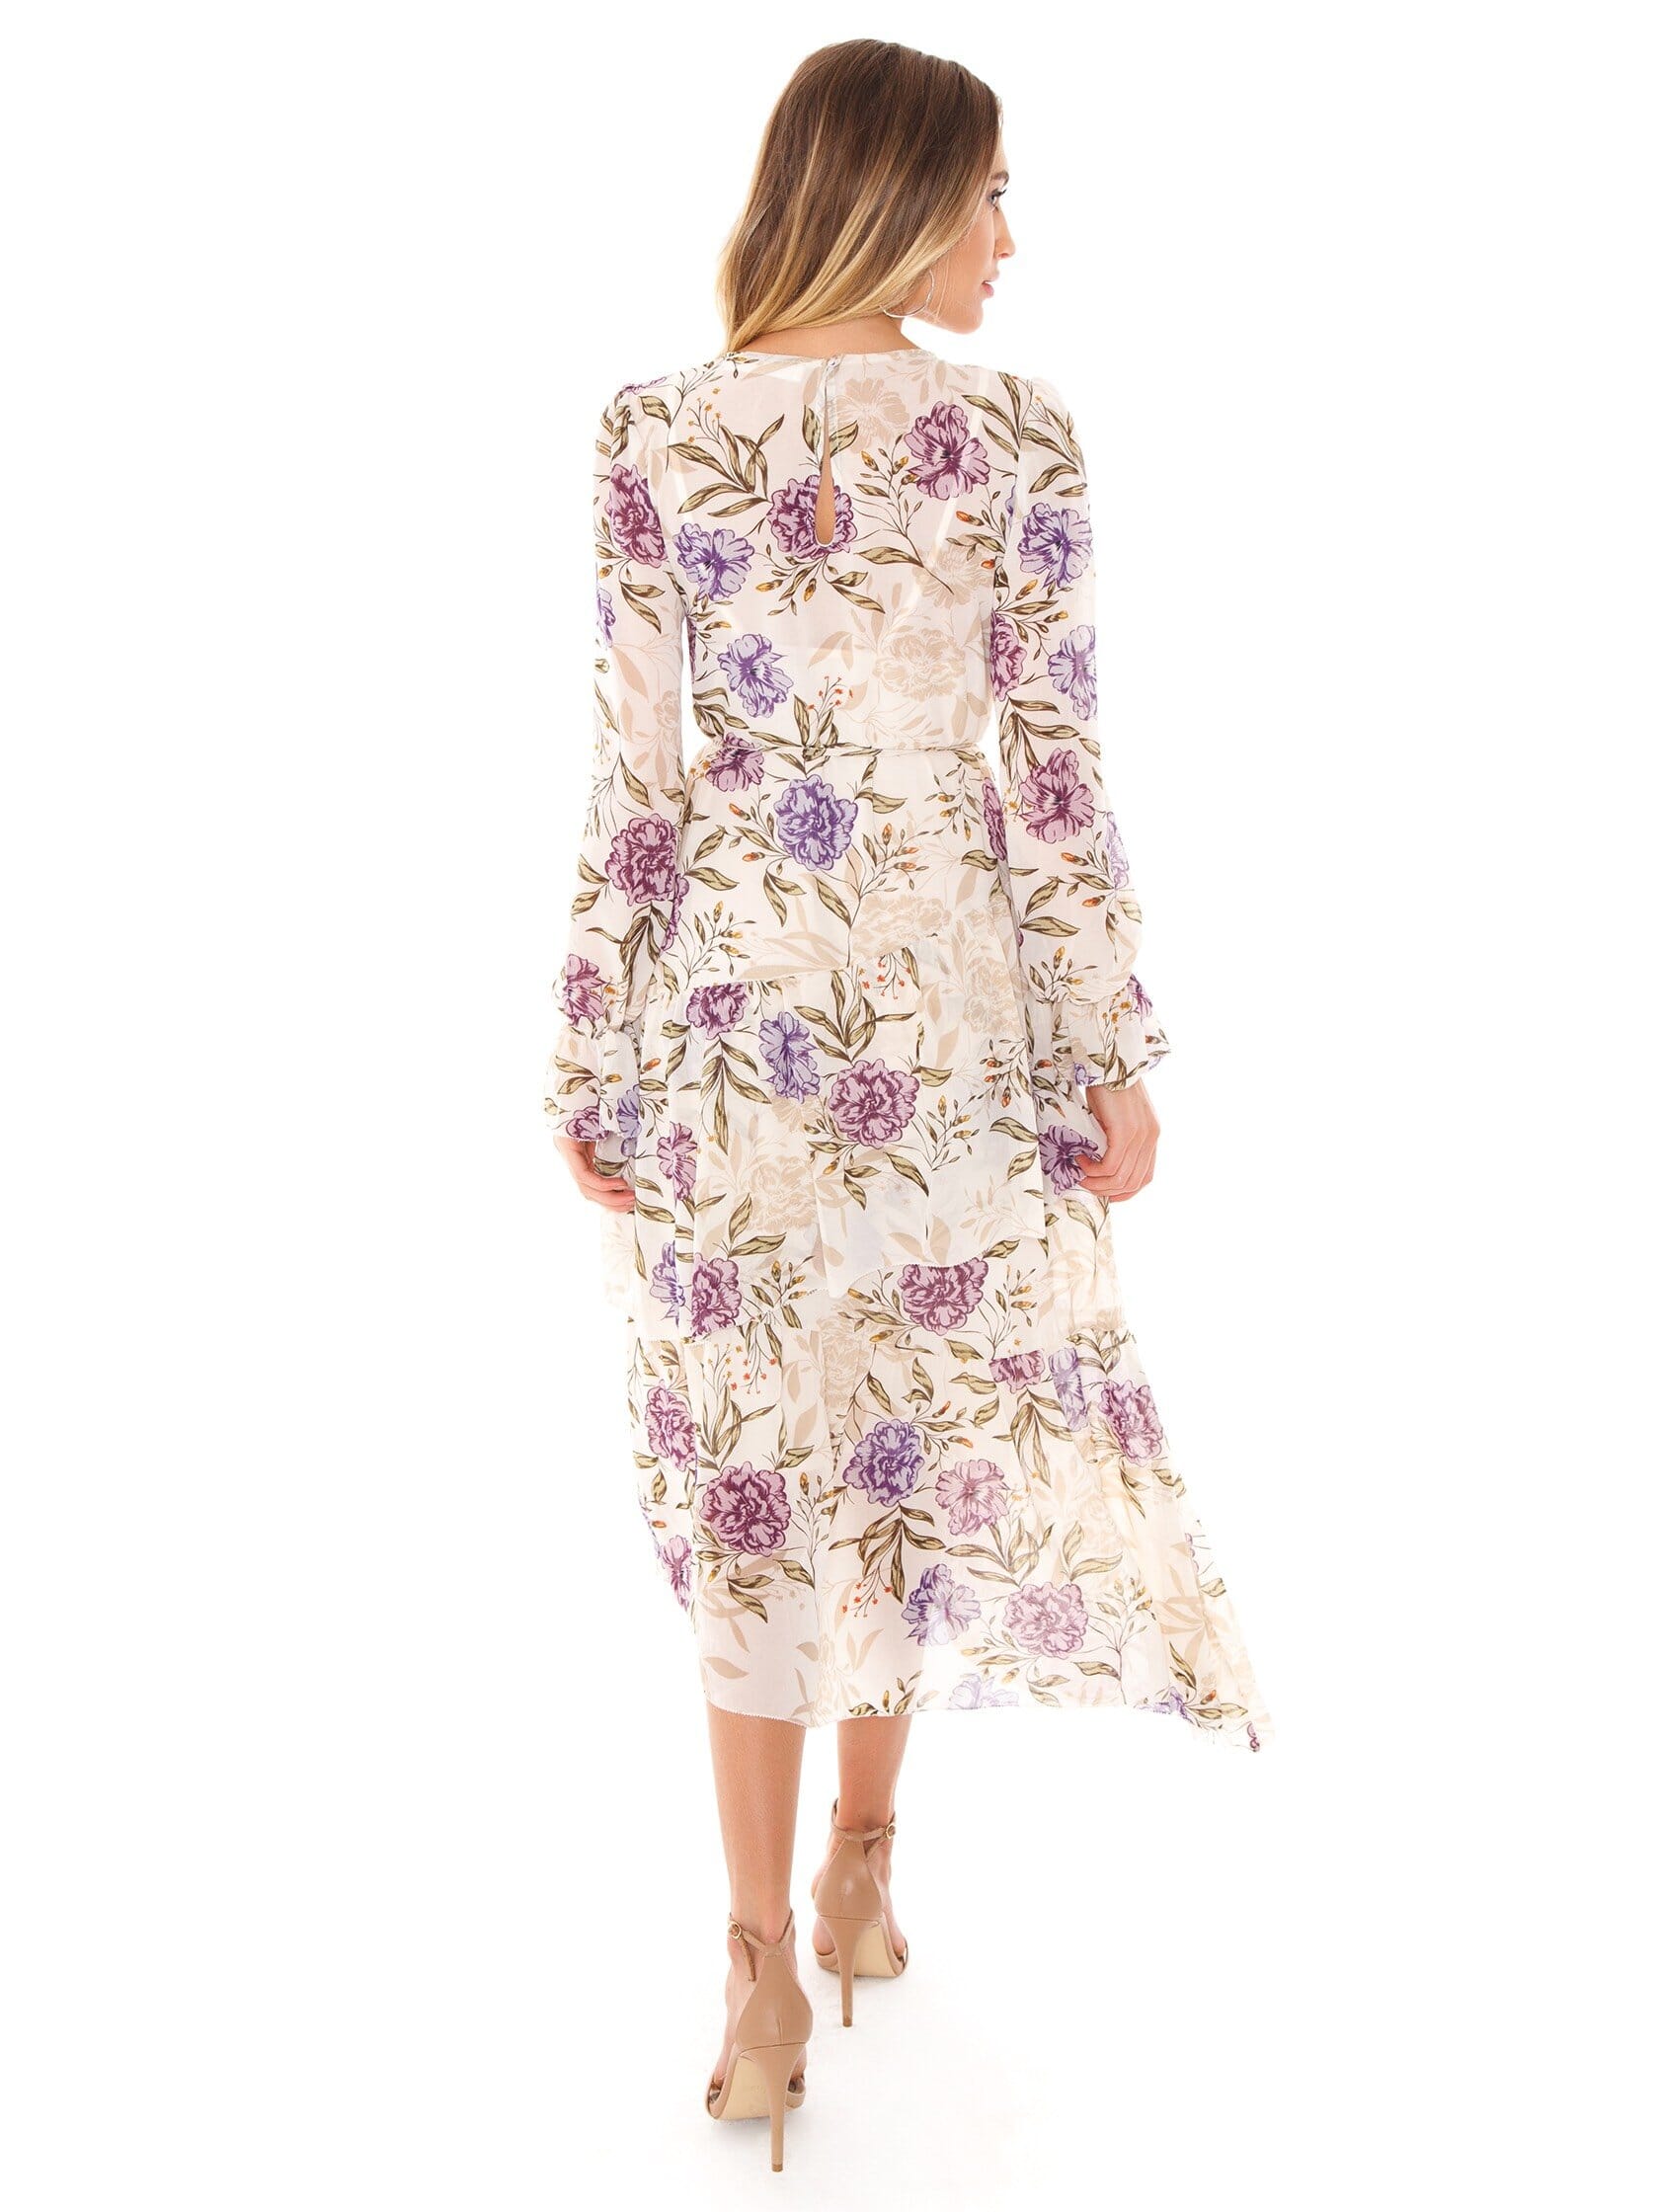 ASTR Mona Dress in Lilac Floral